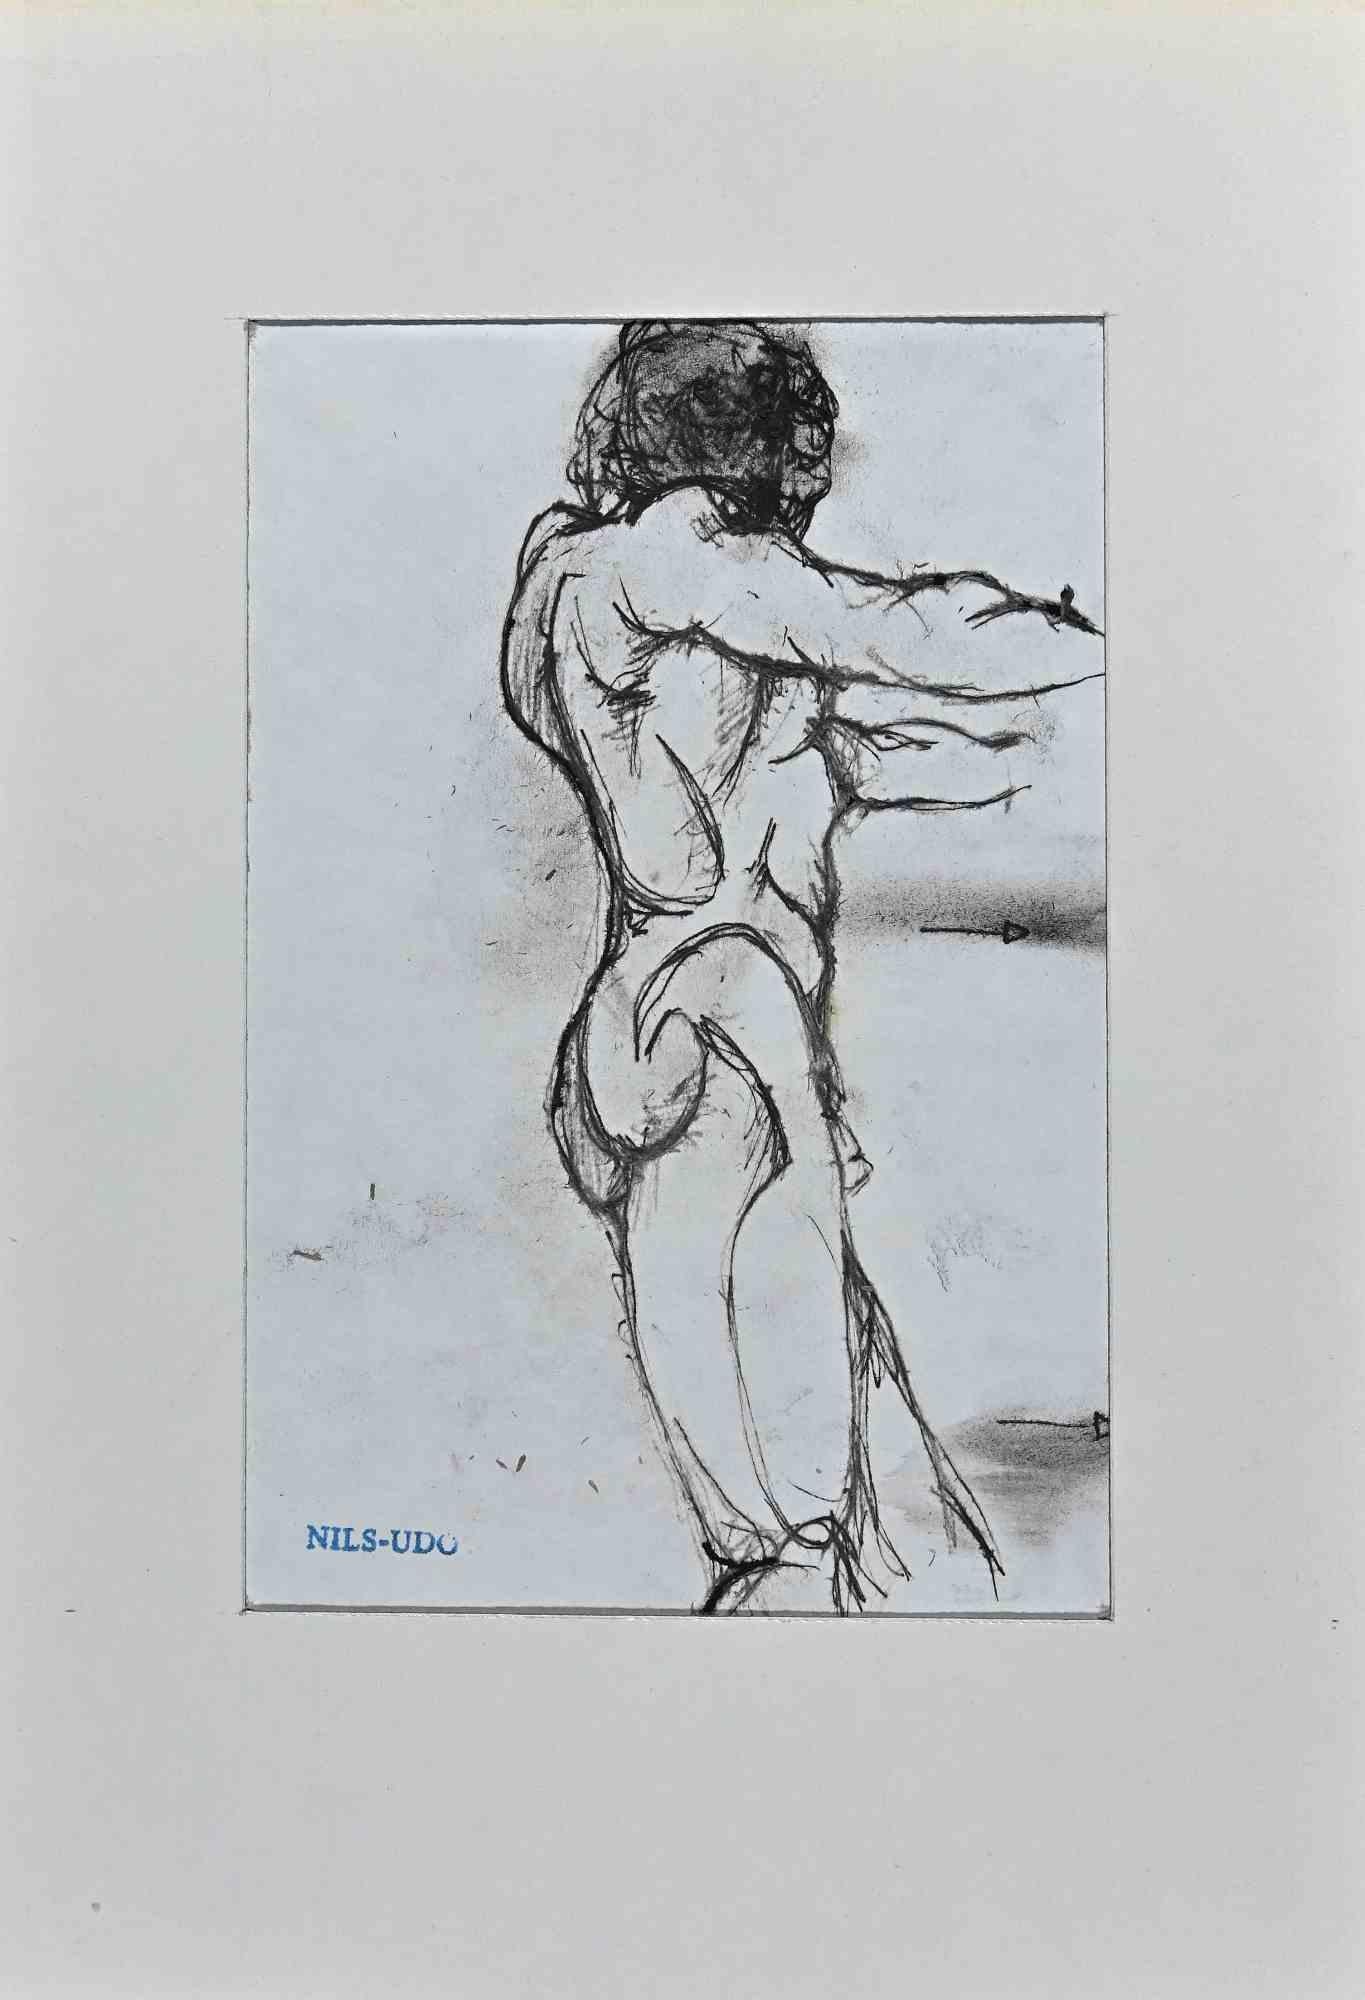 The Nude is an original drawing by Nils-Udo in Late 20th Century.

Drawing in China Ink.

Good conditions. Artist stamp lower left.

Included a Passepartout: 29 x 21 cm.

The artwork is depicted through rapid and confident strokes.